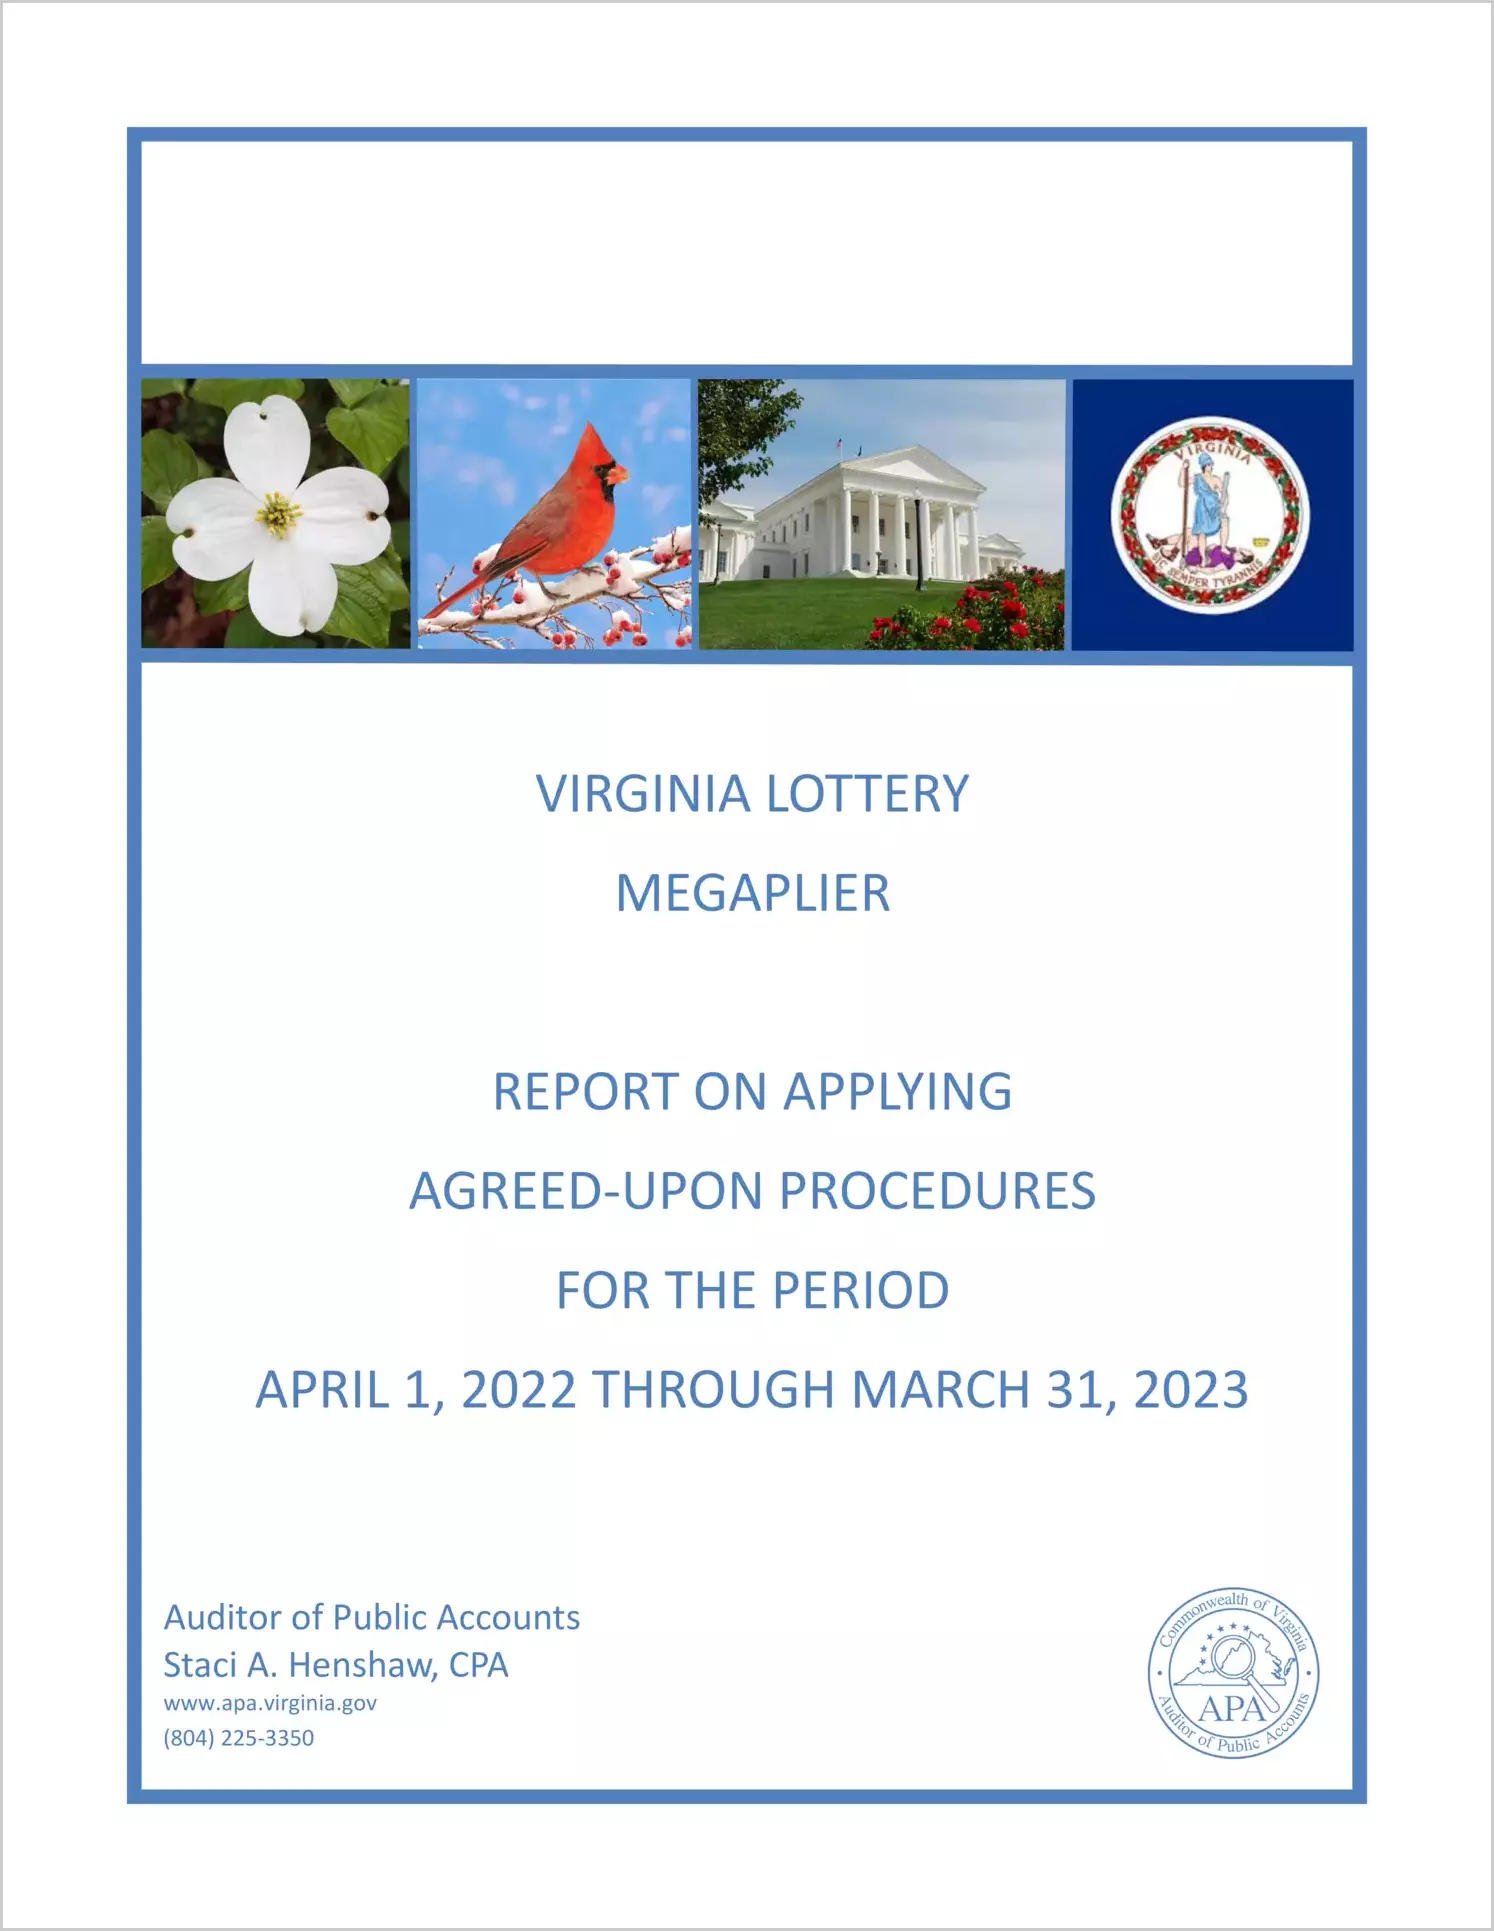 Virginia Lottery Megaplier Report on Applying Agreed-Upon Procedures for the period April 1, 2022 through March 31, 2023